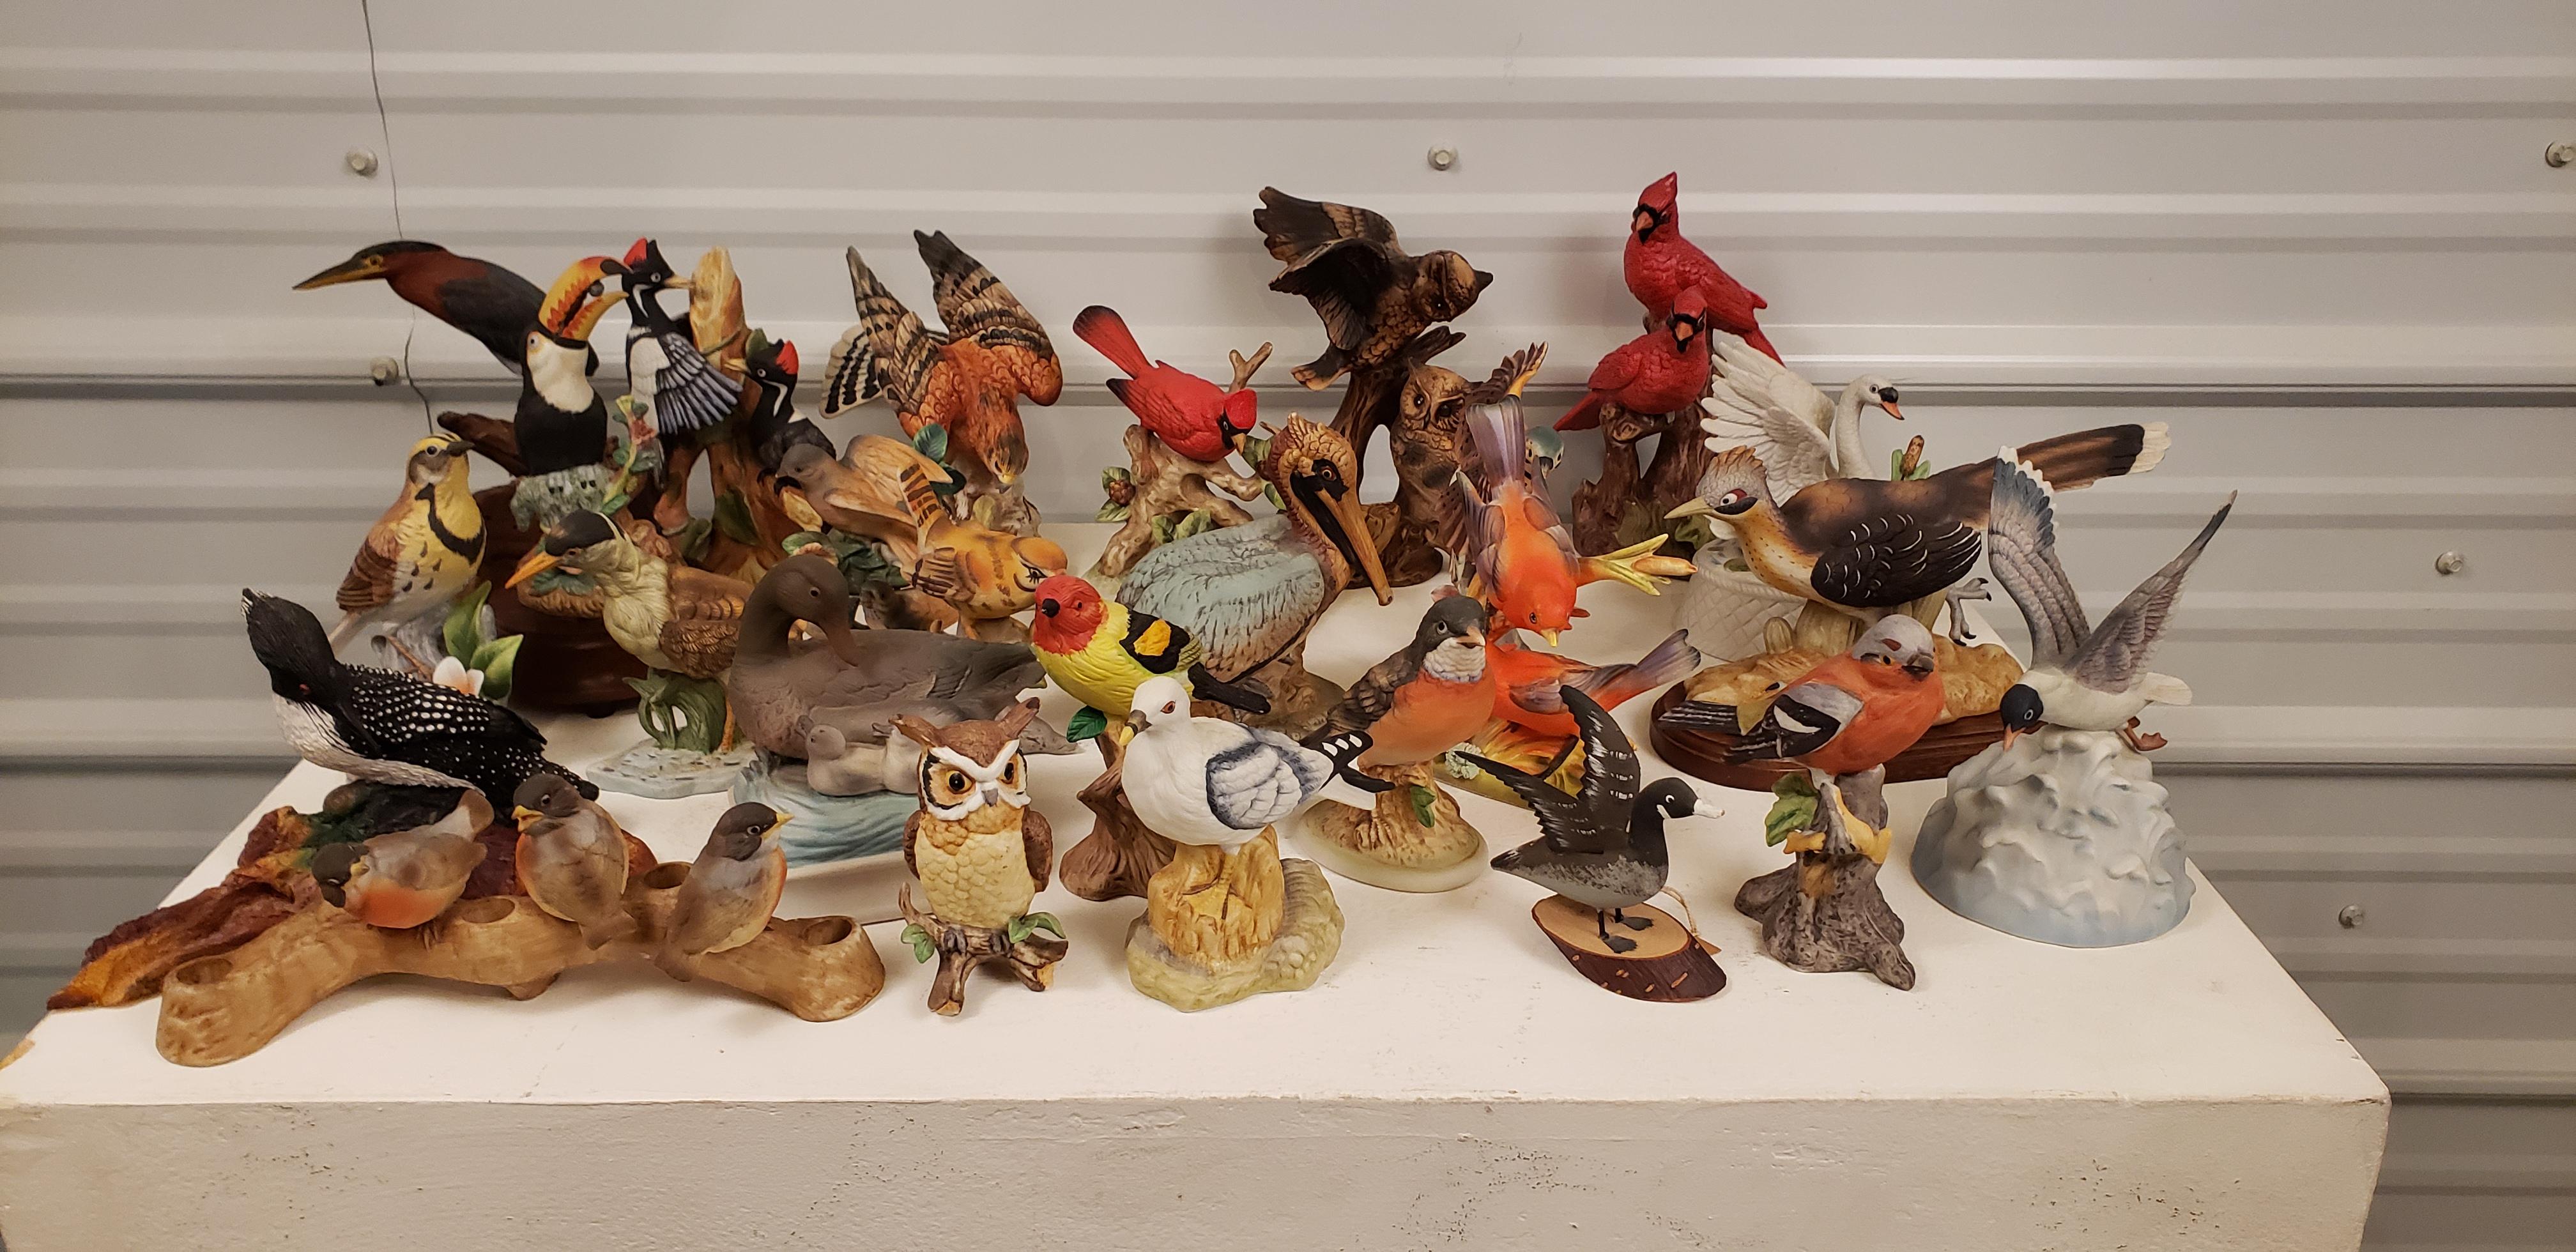 A lifetime collection of birds. A set of 25 some made of porcelain some carved from wood or resin. Of the 25 of them 5 are music boxes. 
 I actually think it's quite charming.
 Sizes vary but the price includes all 25 pieces.